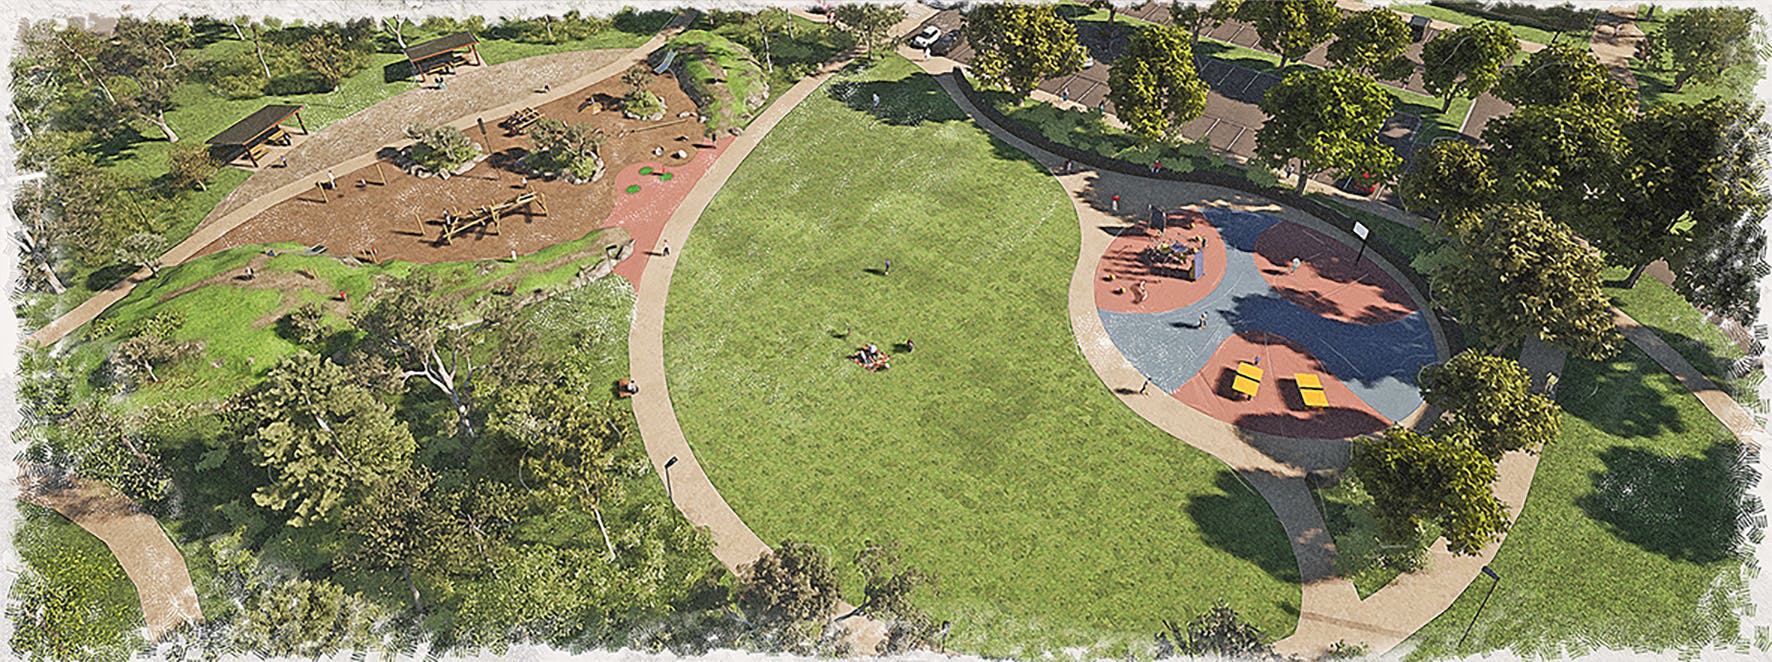 Aerial impression of upgraded playspace and landscape